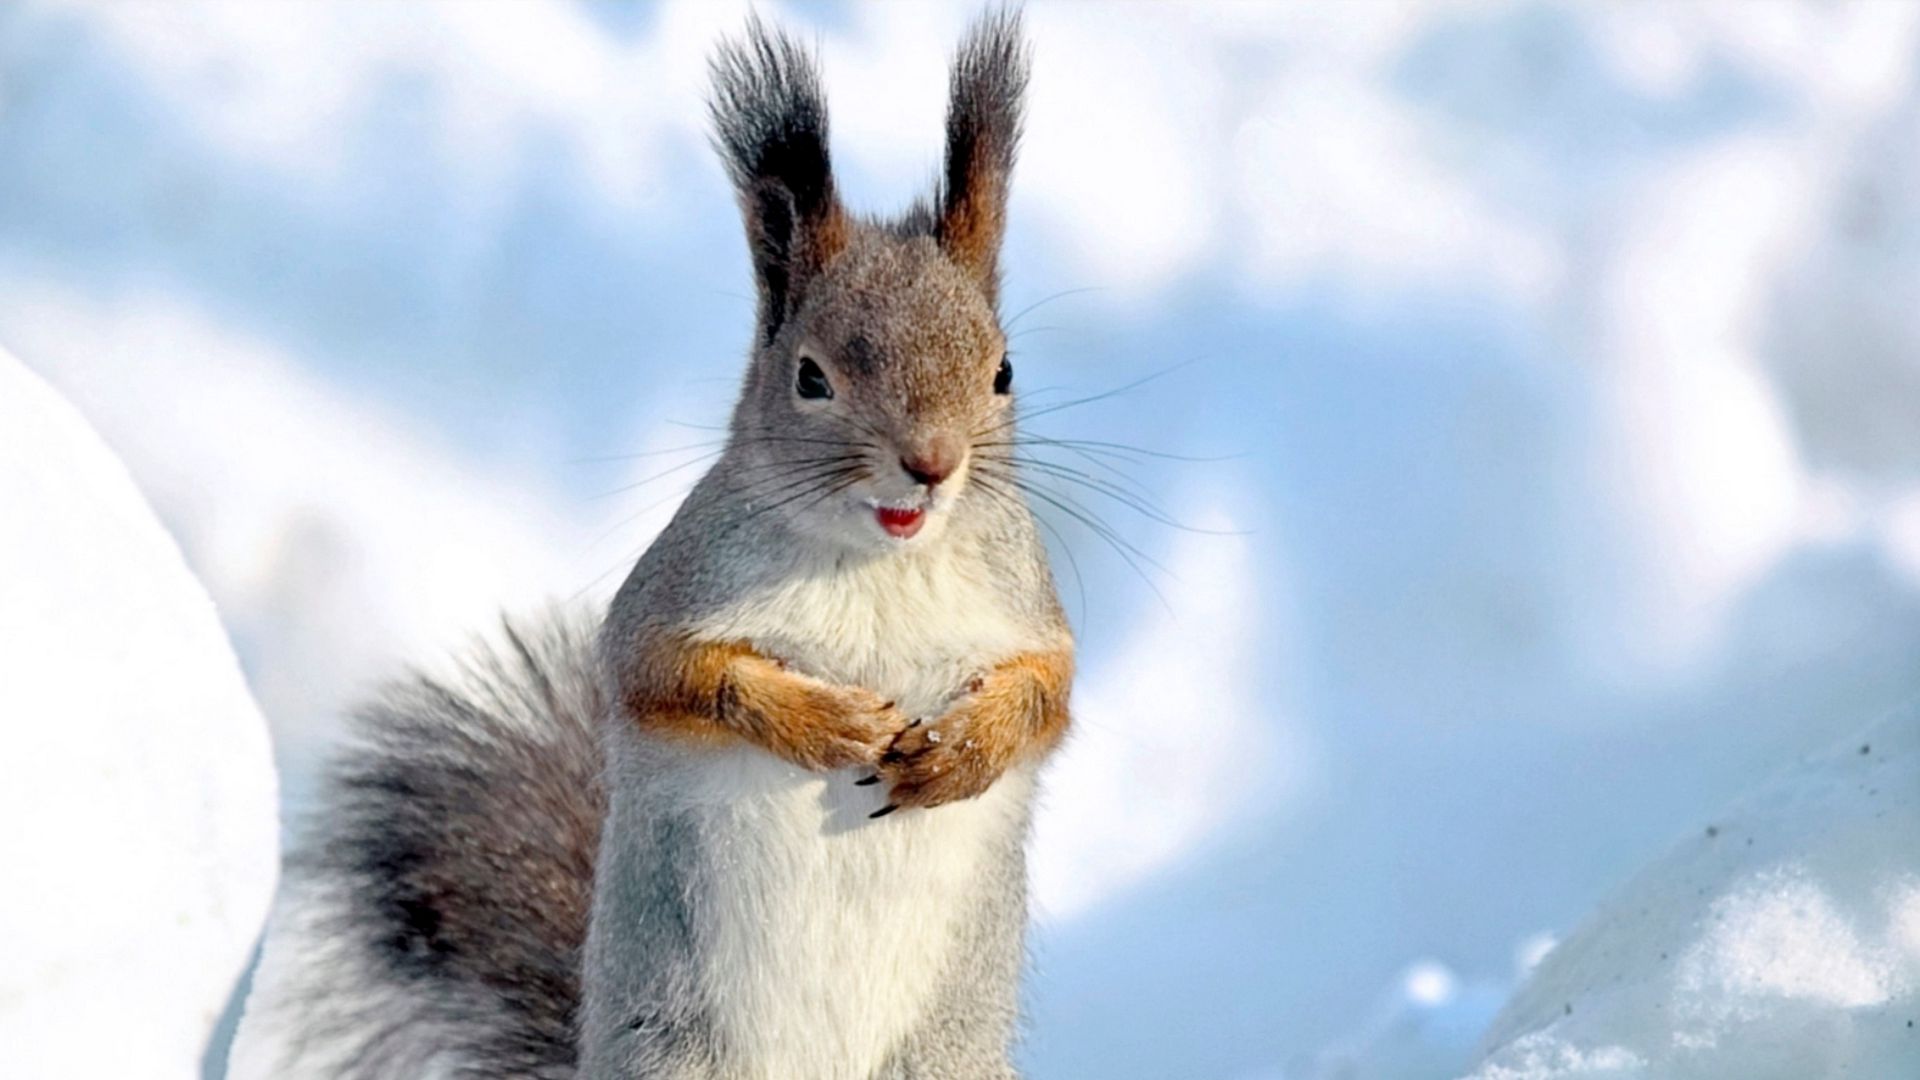 Download wallpaper 1920x1080 squirrel, snow, winter, animal full hd, hdtv, fhd, 1080p HD background